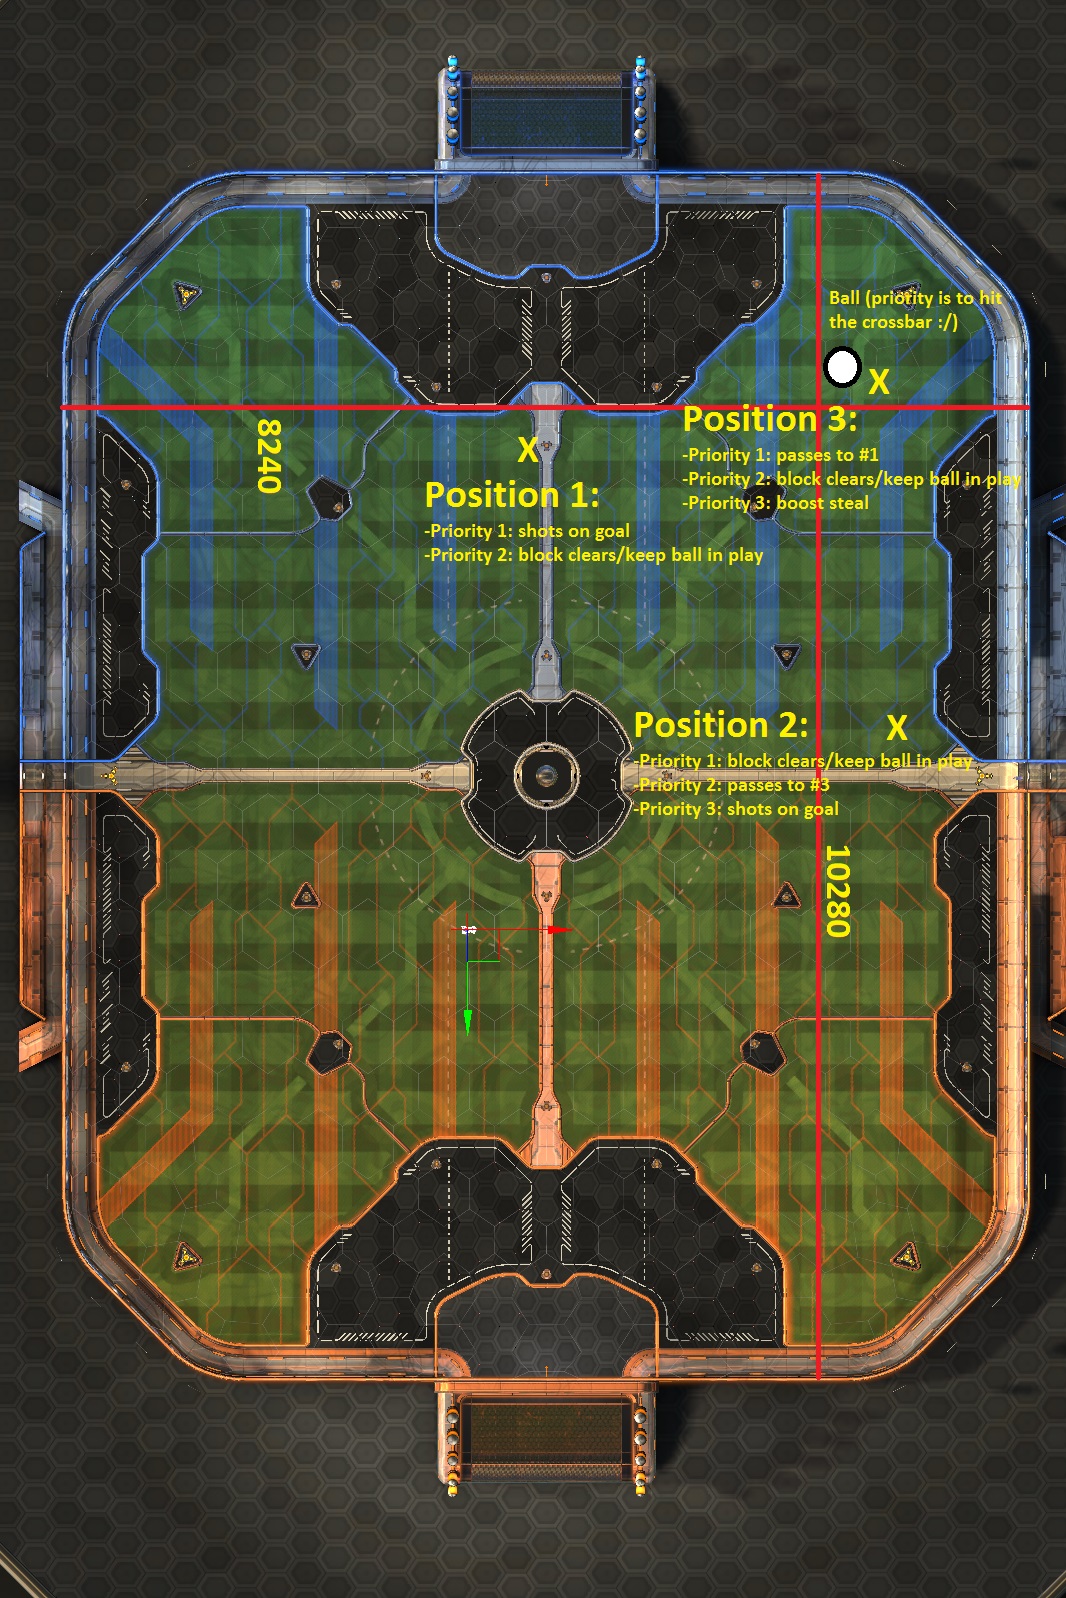 Rocket League Offensive Positioning and Rotation Guide | GuideScroll